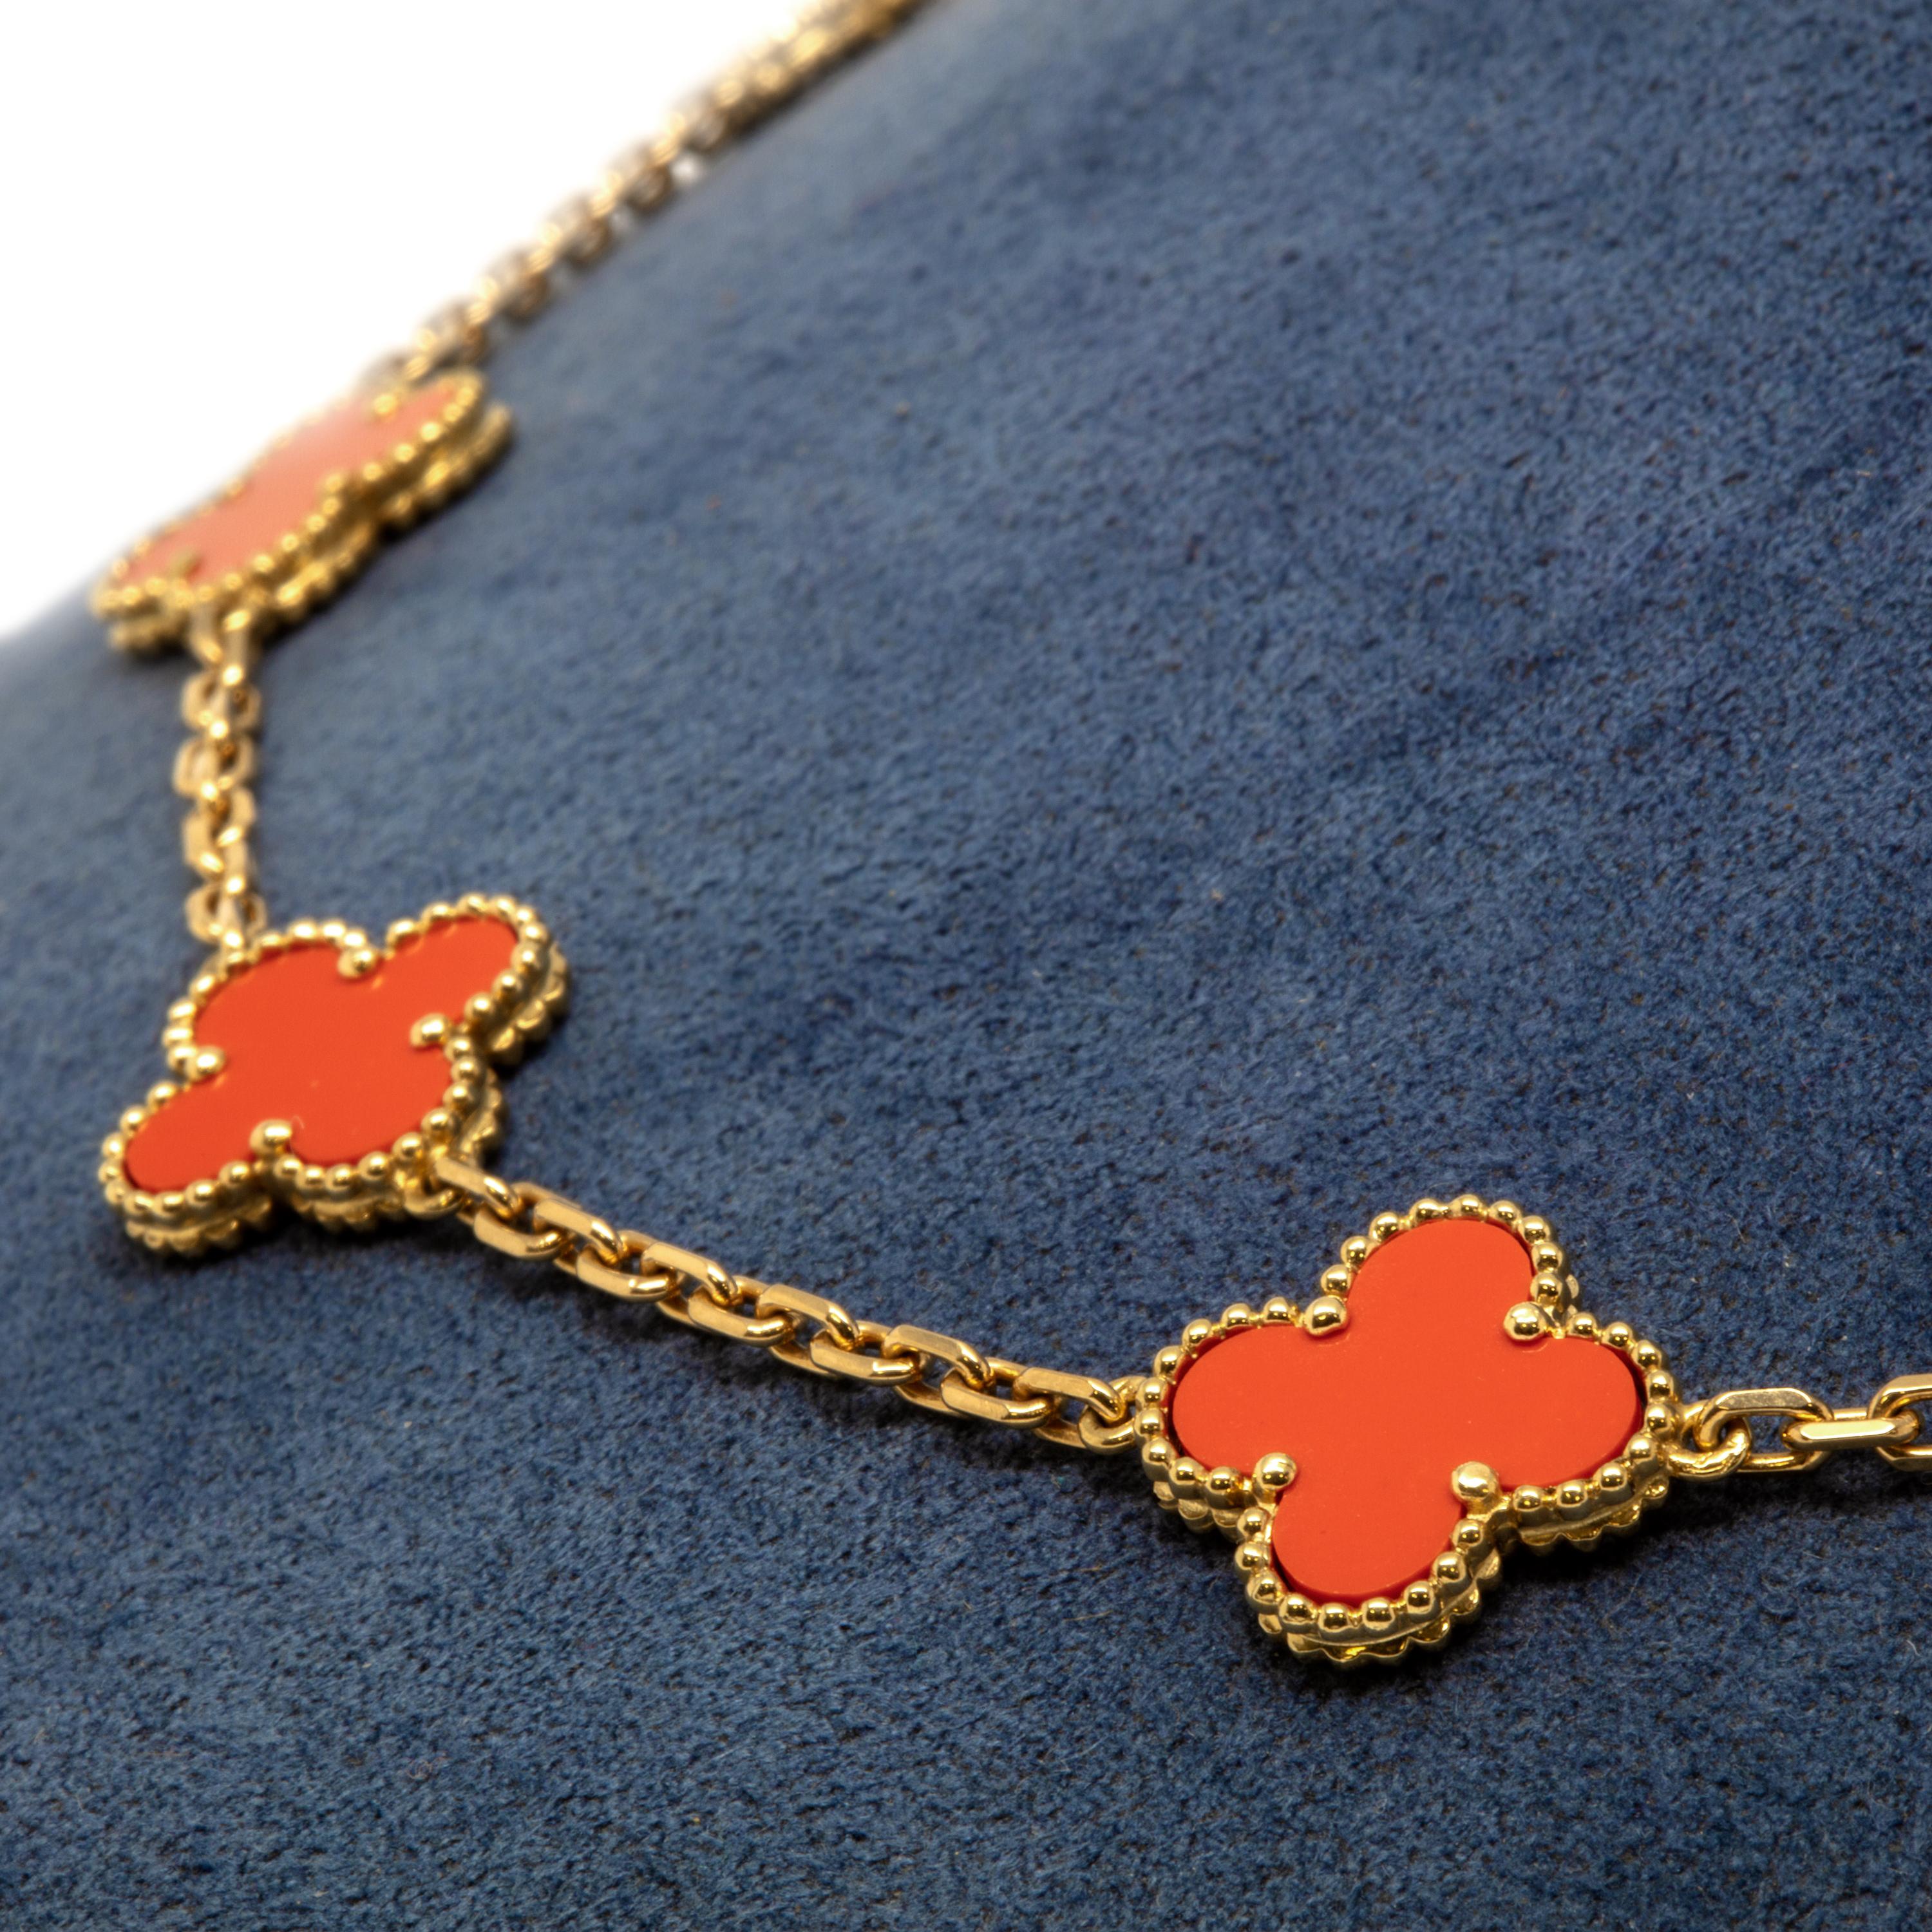 Van Cleef & Arpels 20 Motif Vintage Alhambra Necklace in Coral and 18 Karat Gold In Excellent Condition For Sale In Hartsdale, NY